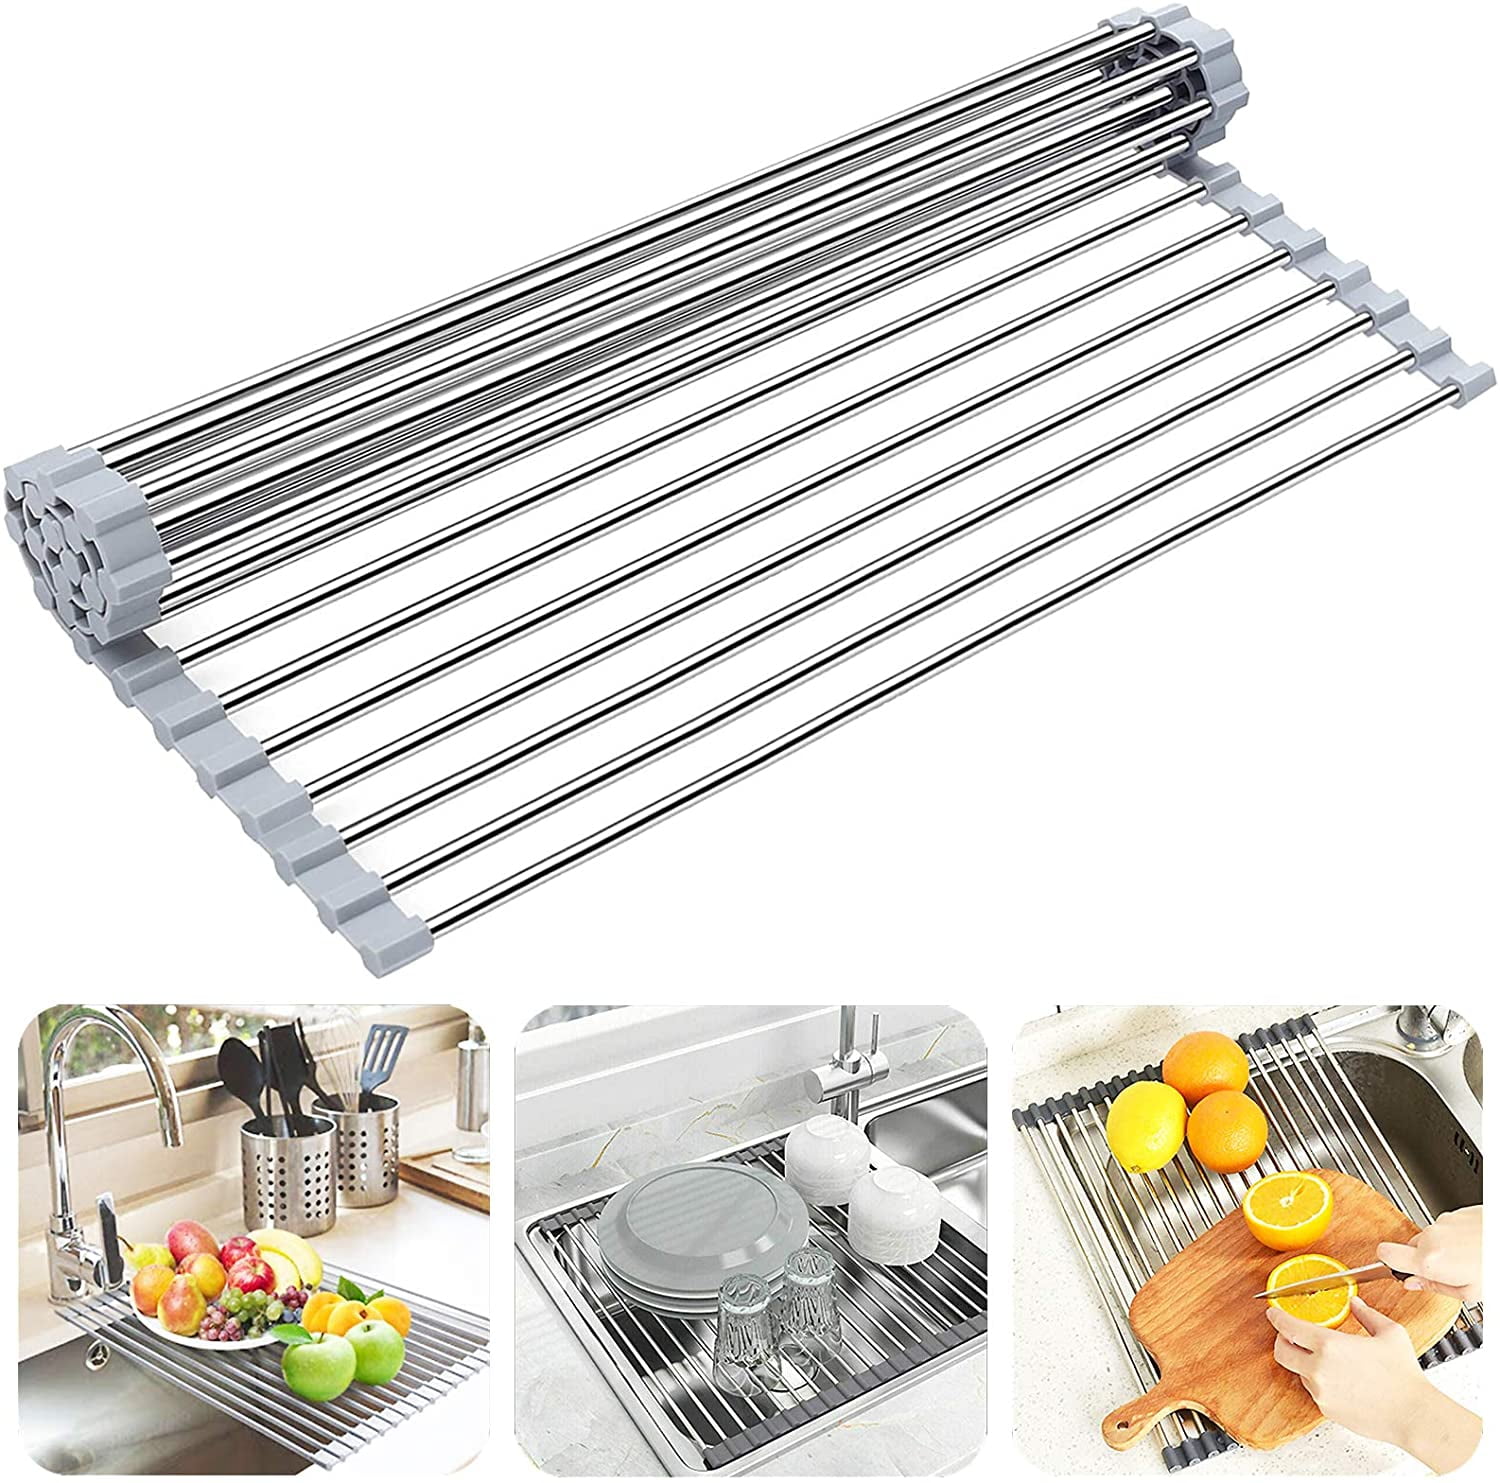 40%OFF Premium 304 Stainless Steel Roll-Up Dish Drying Rack Water Drainer 